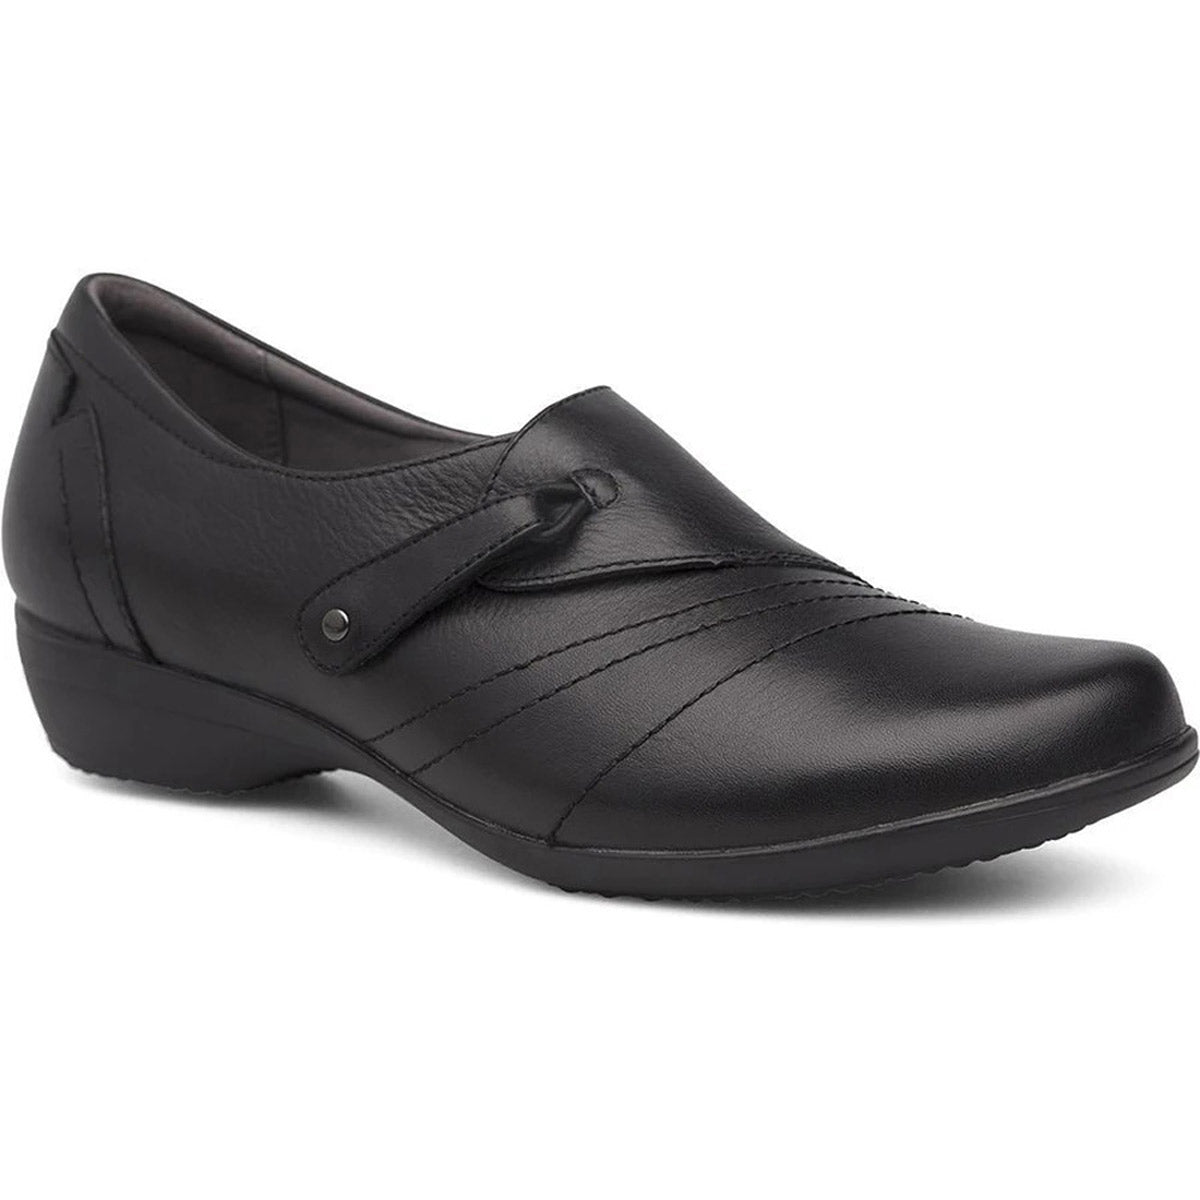 Black leather Dansko Franny comfort shoe with a low heel and a button detail.
Product Name: DANSKO FRANNY MILLED NAPPA BLACK - WOMENS
Brand Name: Dansko